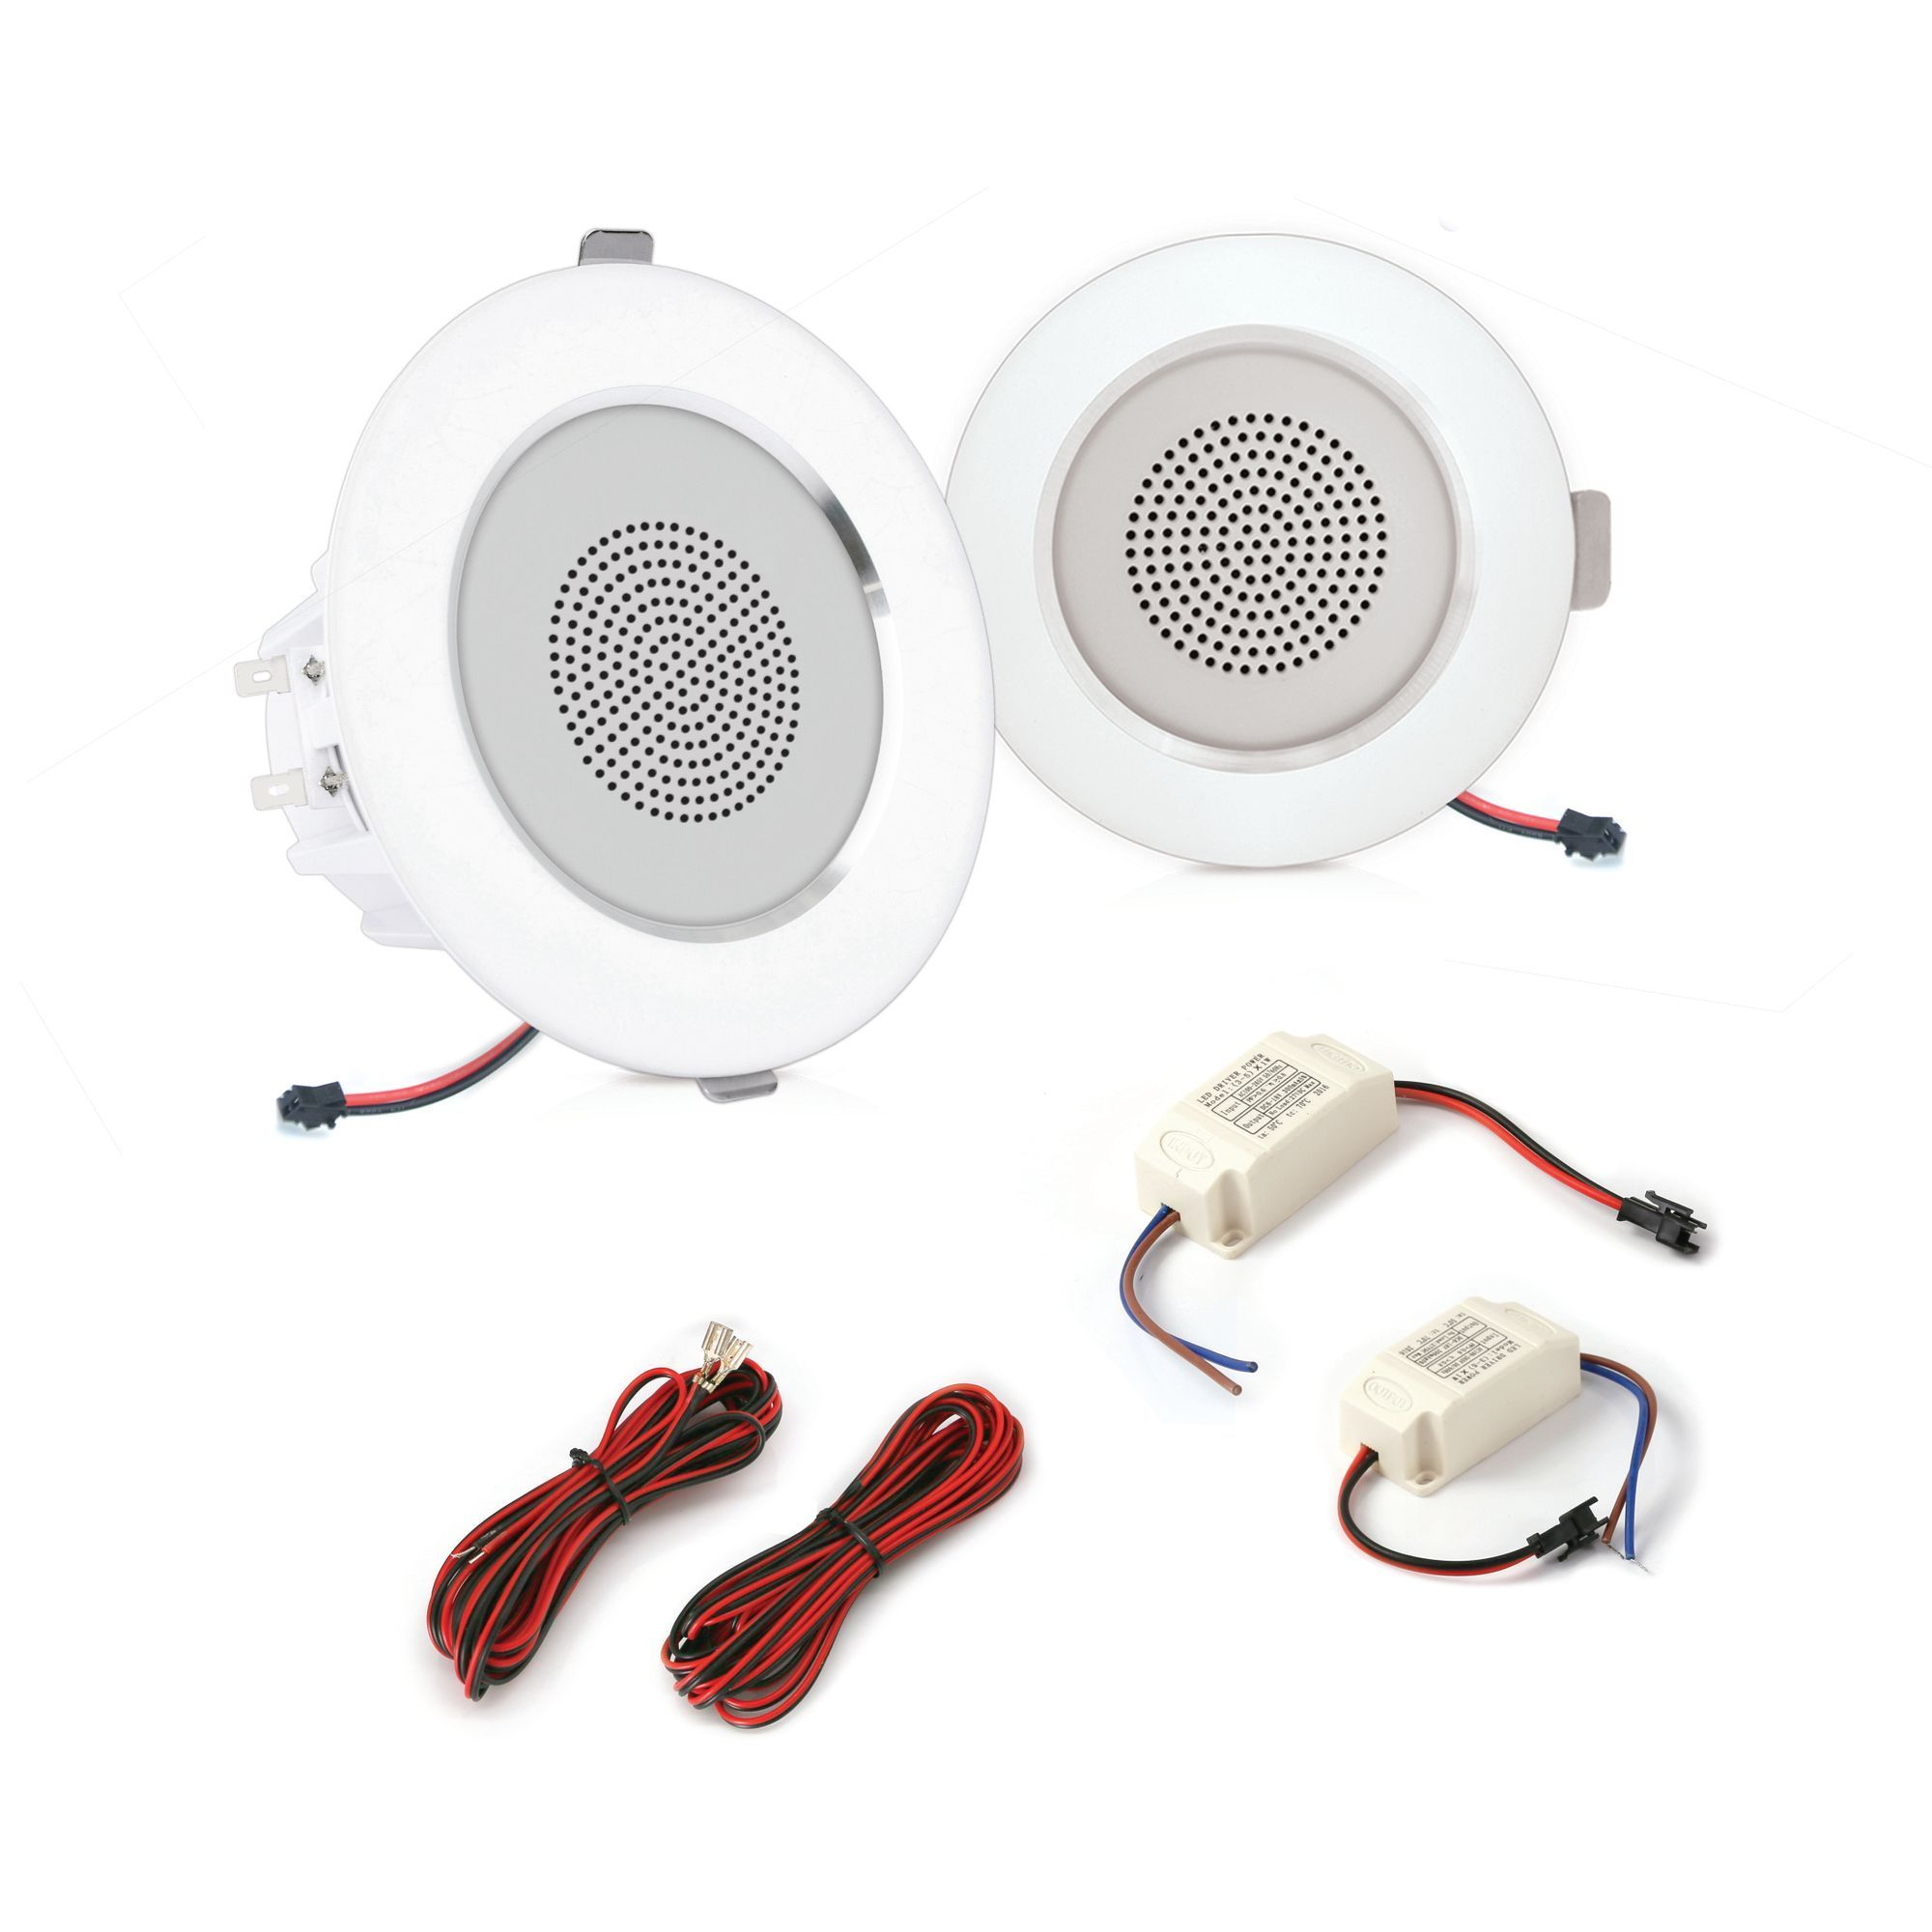 Pyle Pair of 4” 2-Way Home Speaker System, In-wall/Ceiling, LED Lights, 2 Ch. Amplifier (PDICLE4)